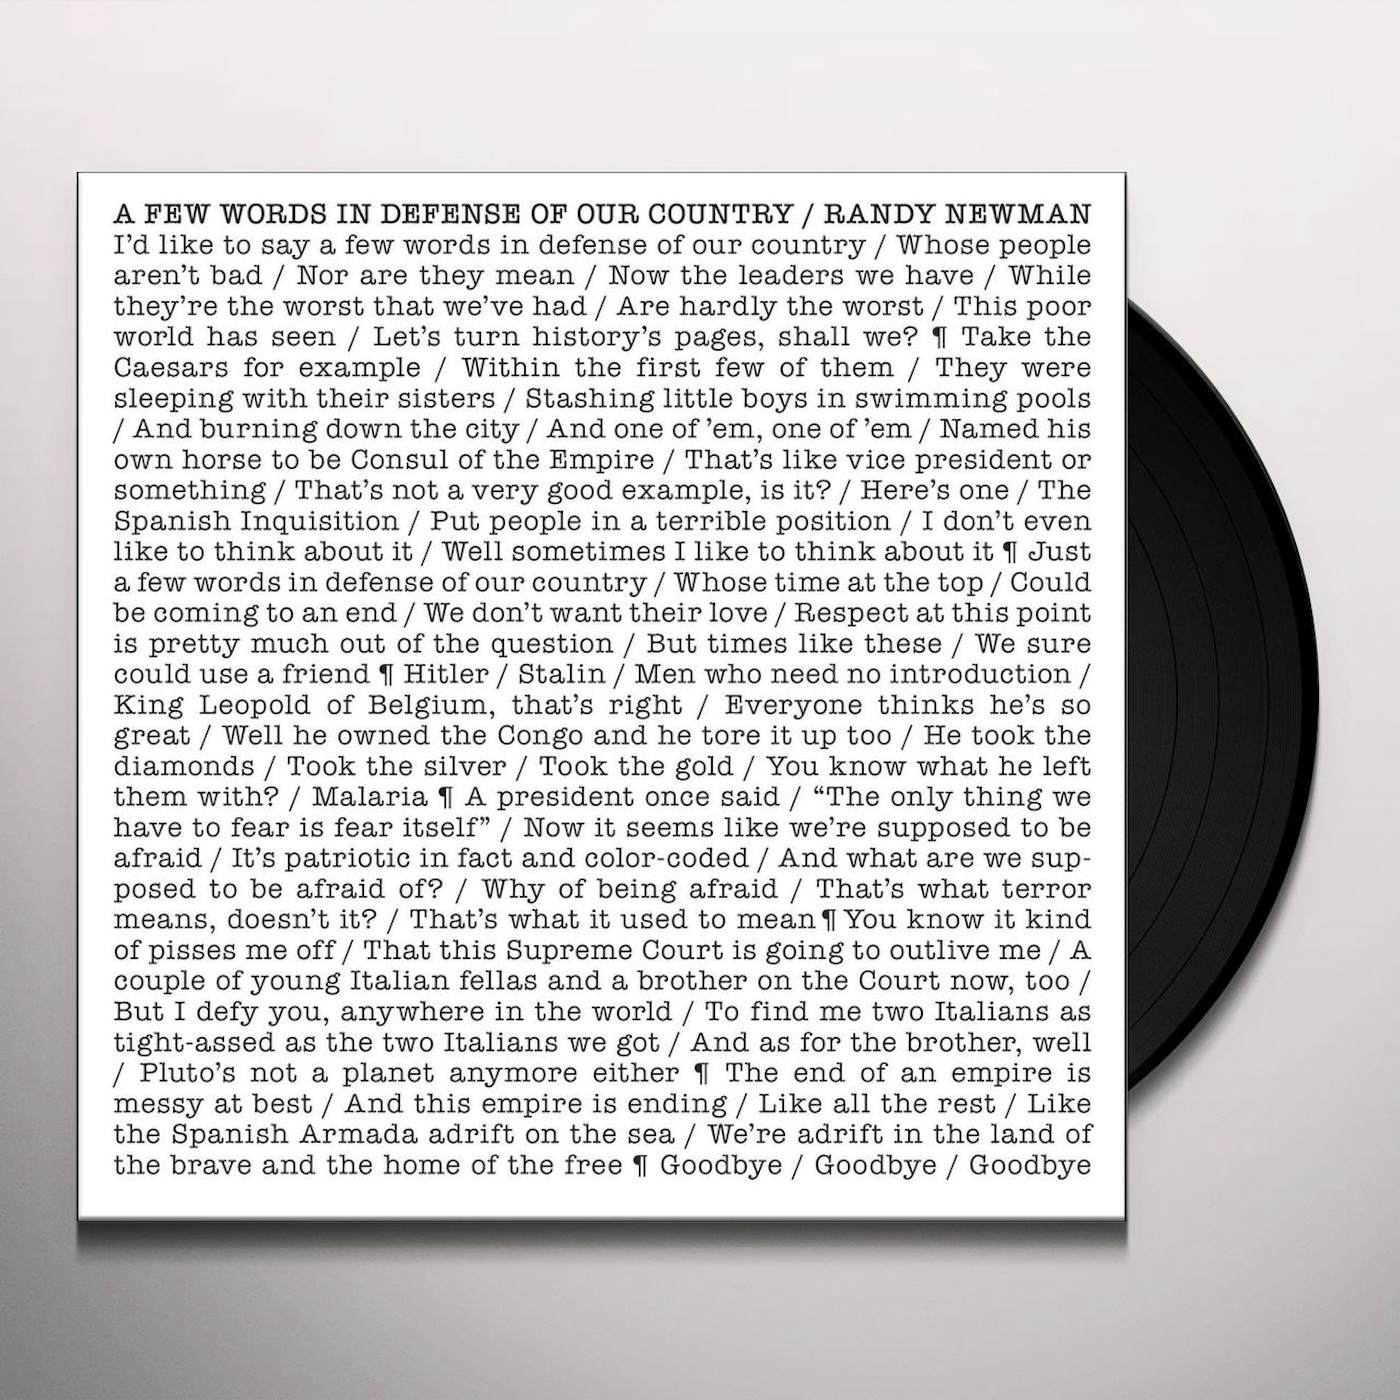 Randy Newman FEW WORDS IN DEFENSE OF OUR COUNTRY Vinyl Record